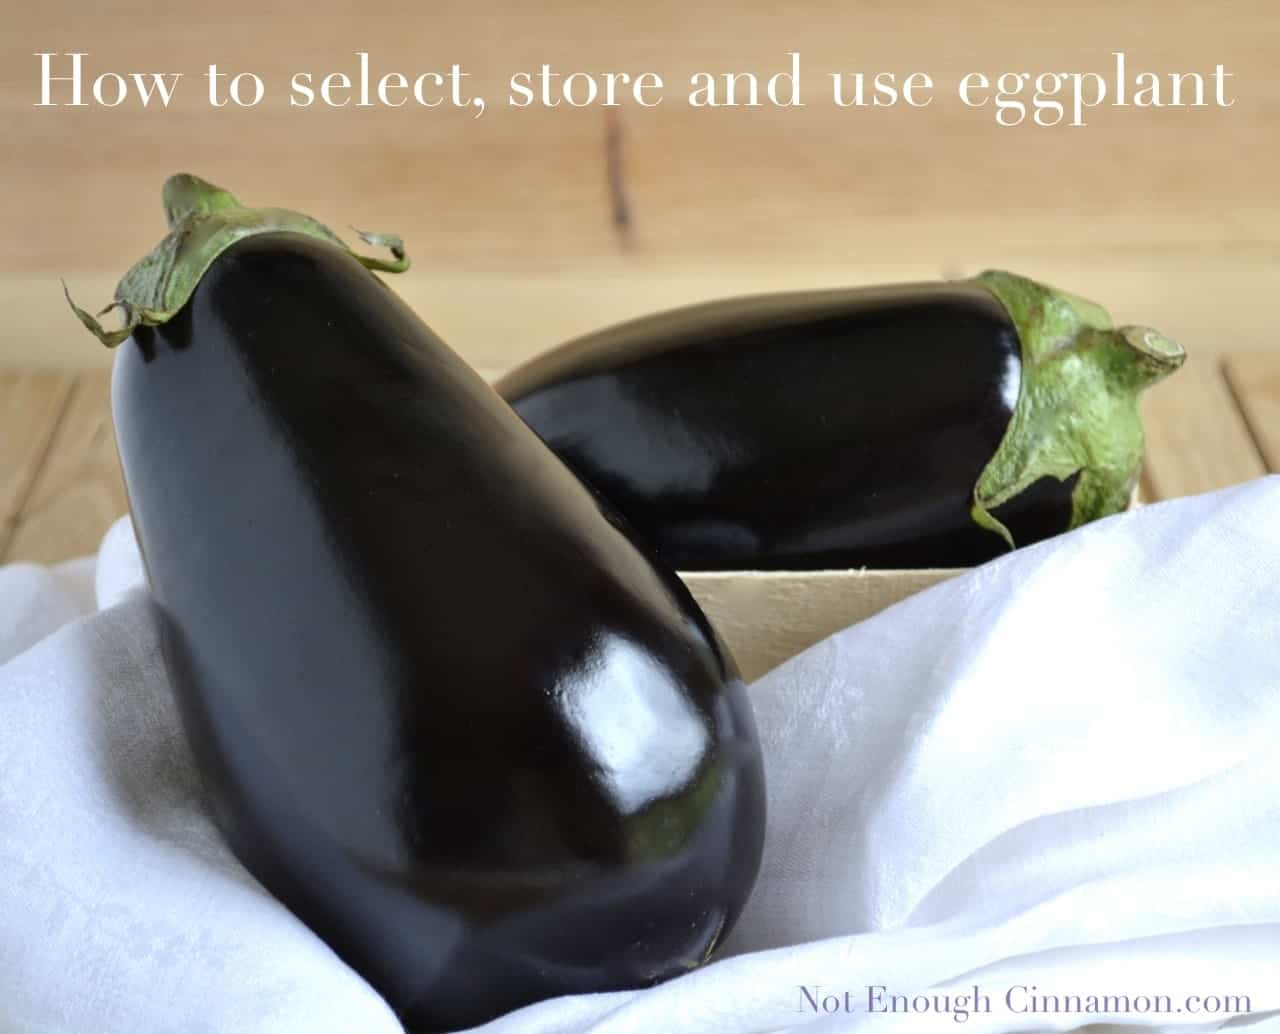 How to select, store and use eggplant